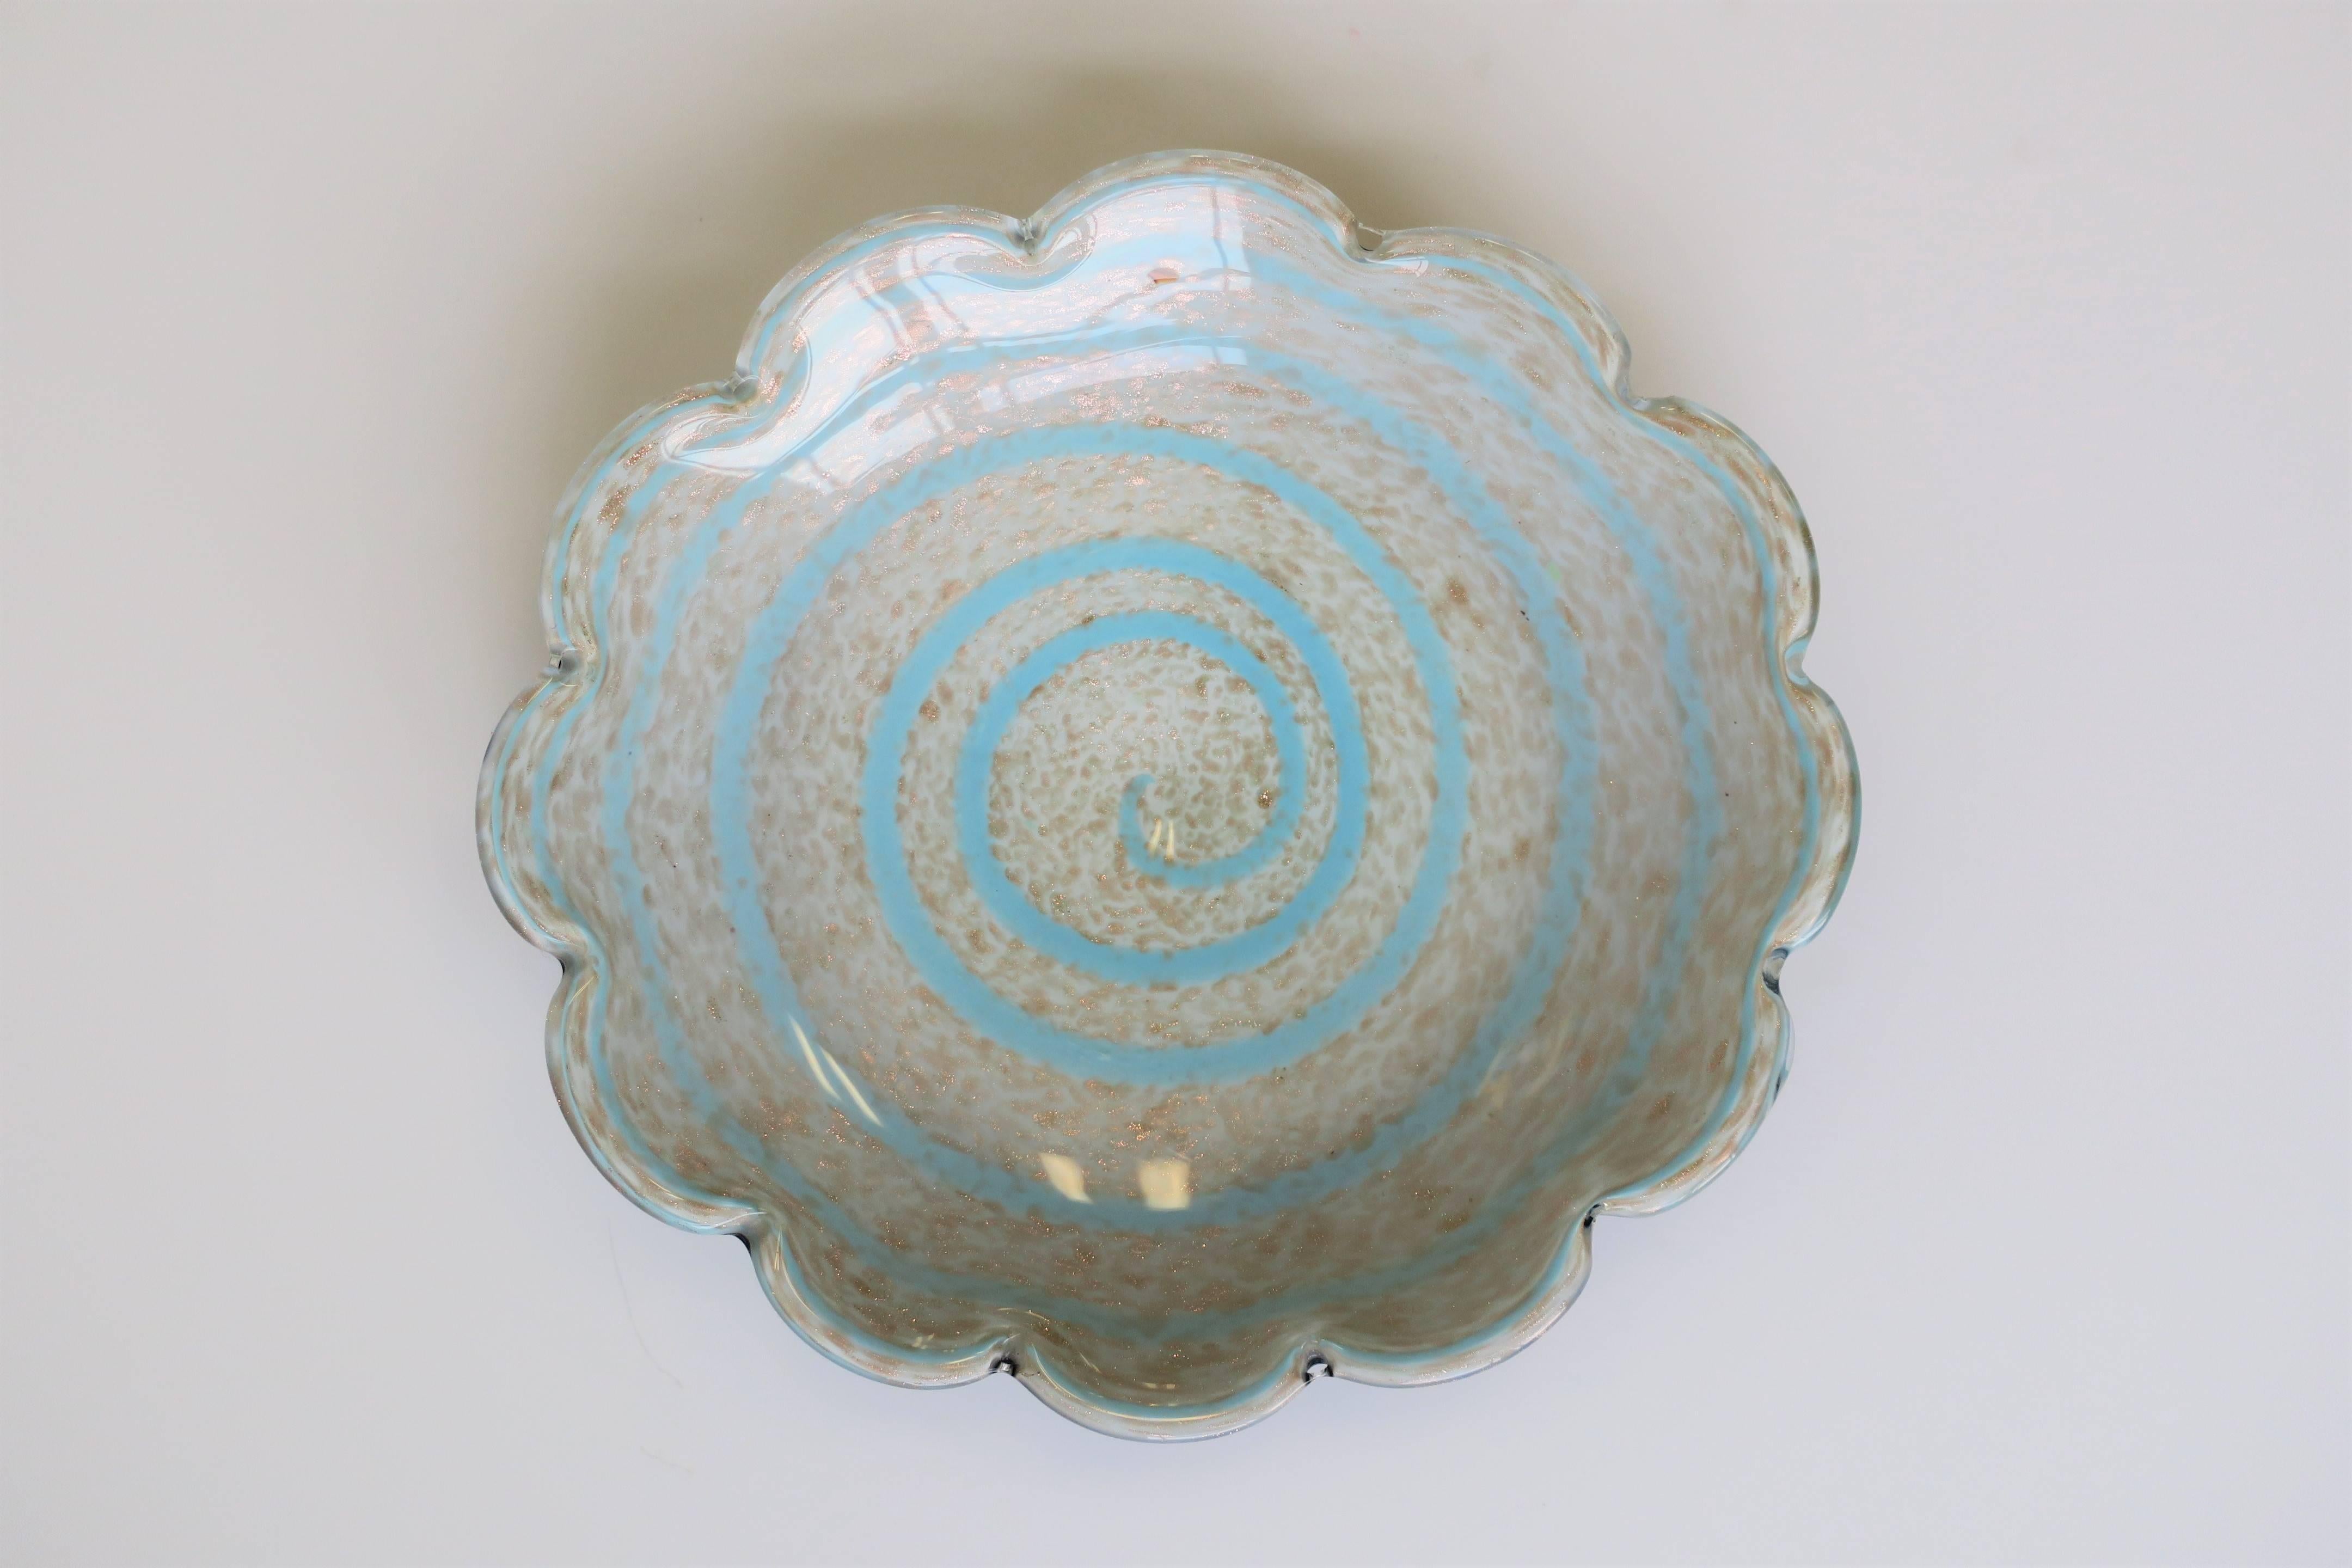 A very beautiful, substantial and fun vintage Italian Murano round blue and white art glass bowl, in the style of Italian designer Alfredo Barbini, circa 20th century, Italy. This Murano art glass bowl is predominantly white with a powder or baby